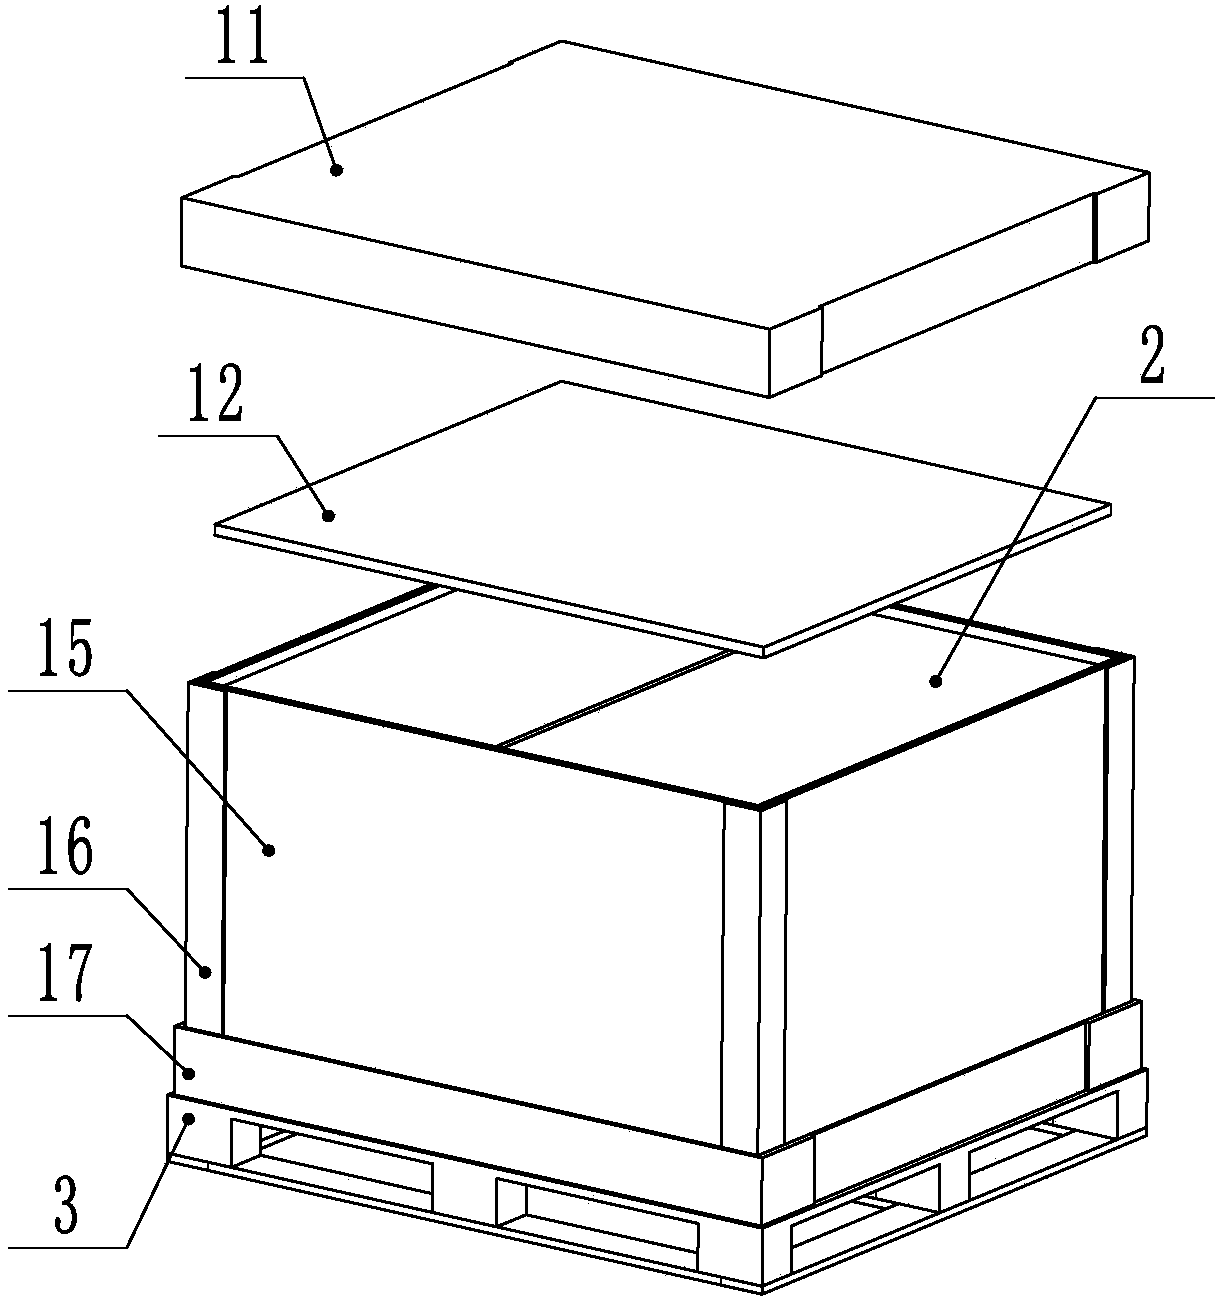 A server package design device